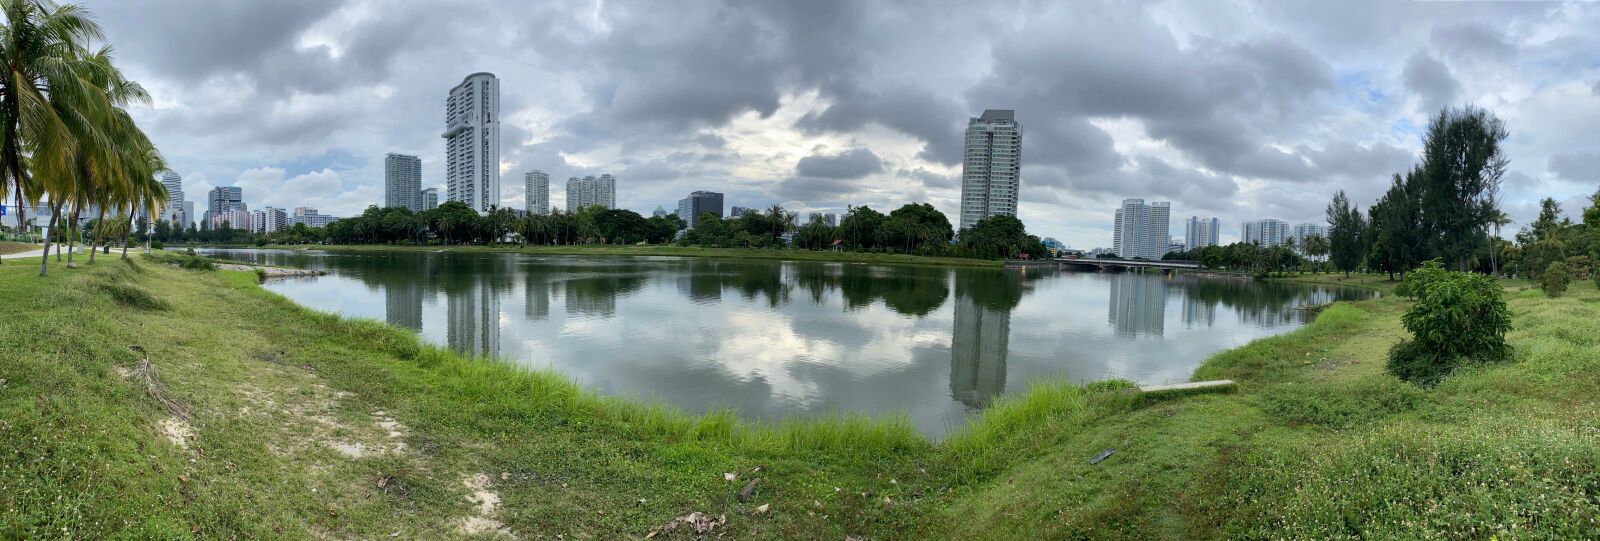 Apple iPhone 11 + iPhone 11 back camera 4.25mm f/1.8 sample photo. Reflections, city-scape, singapore photography